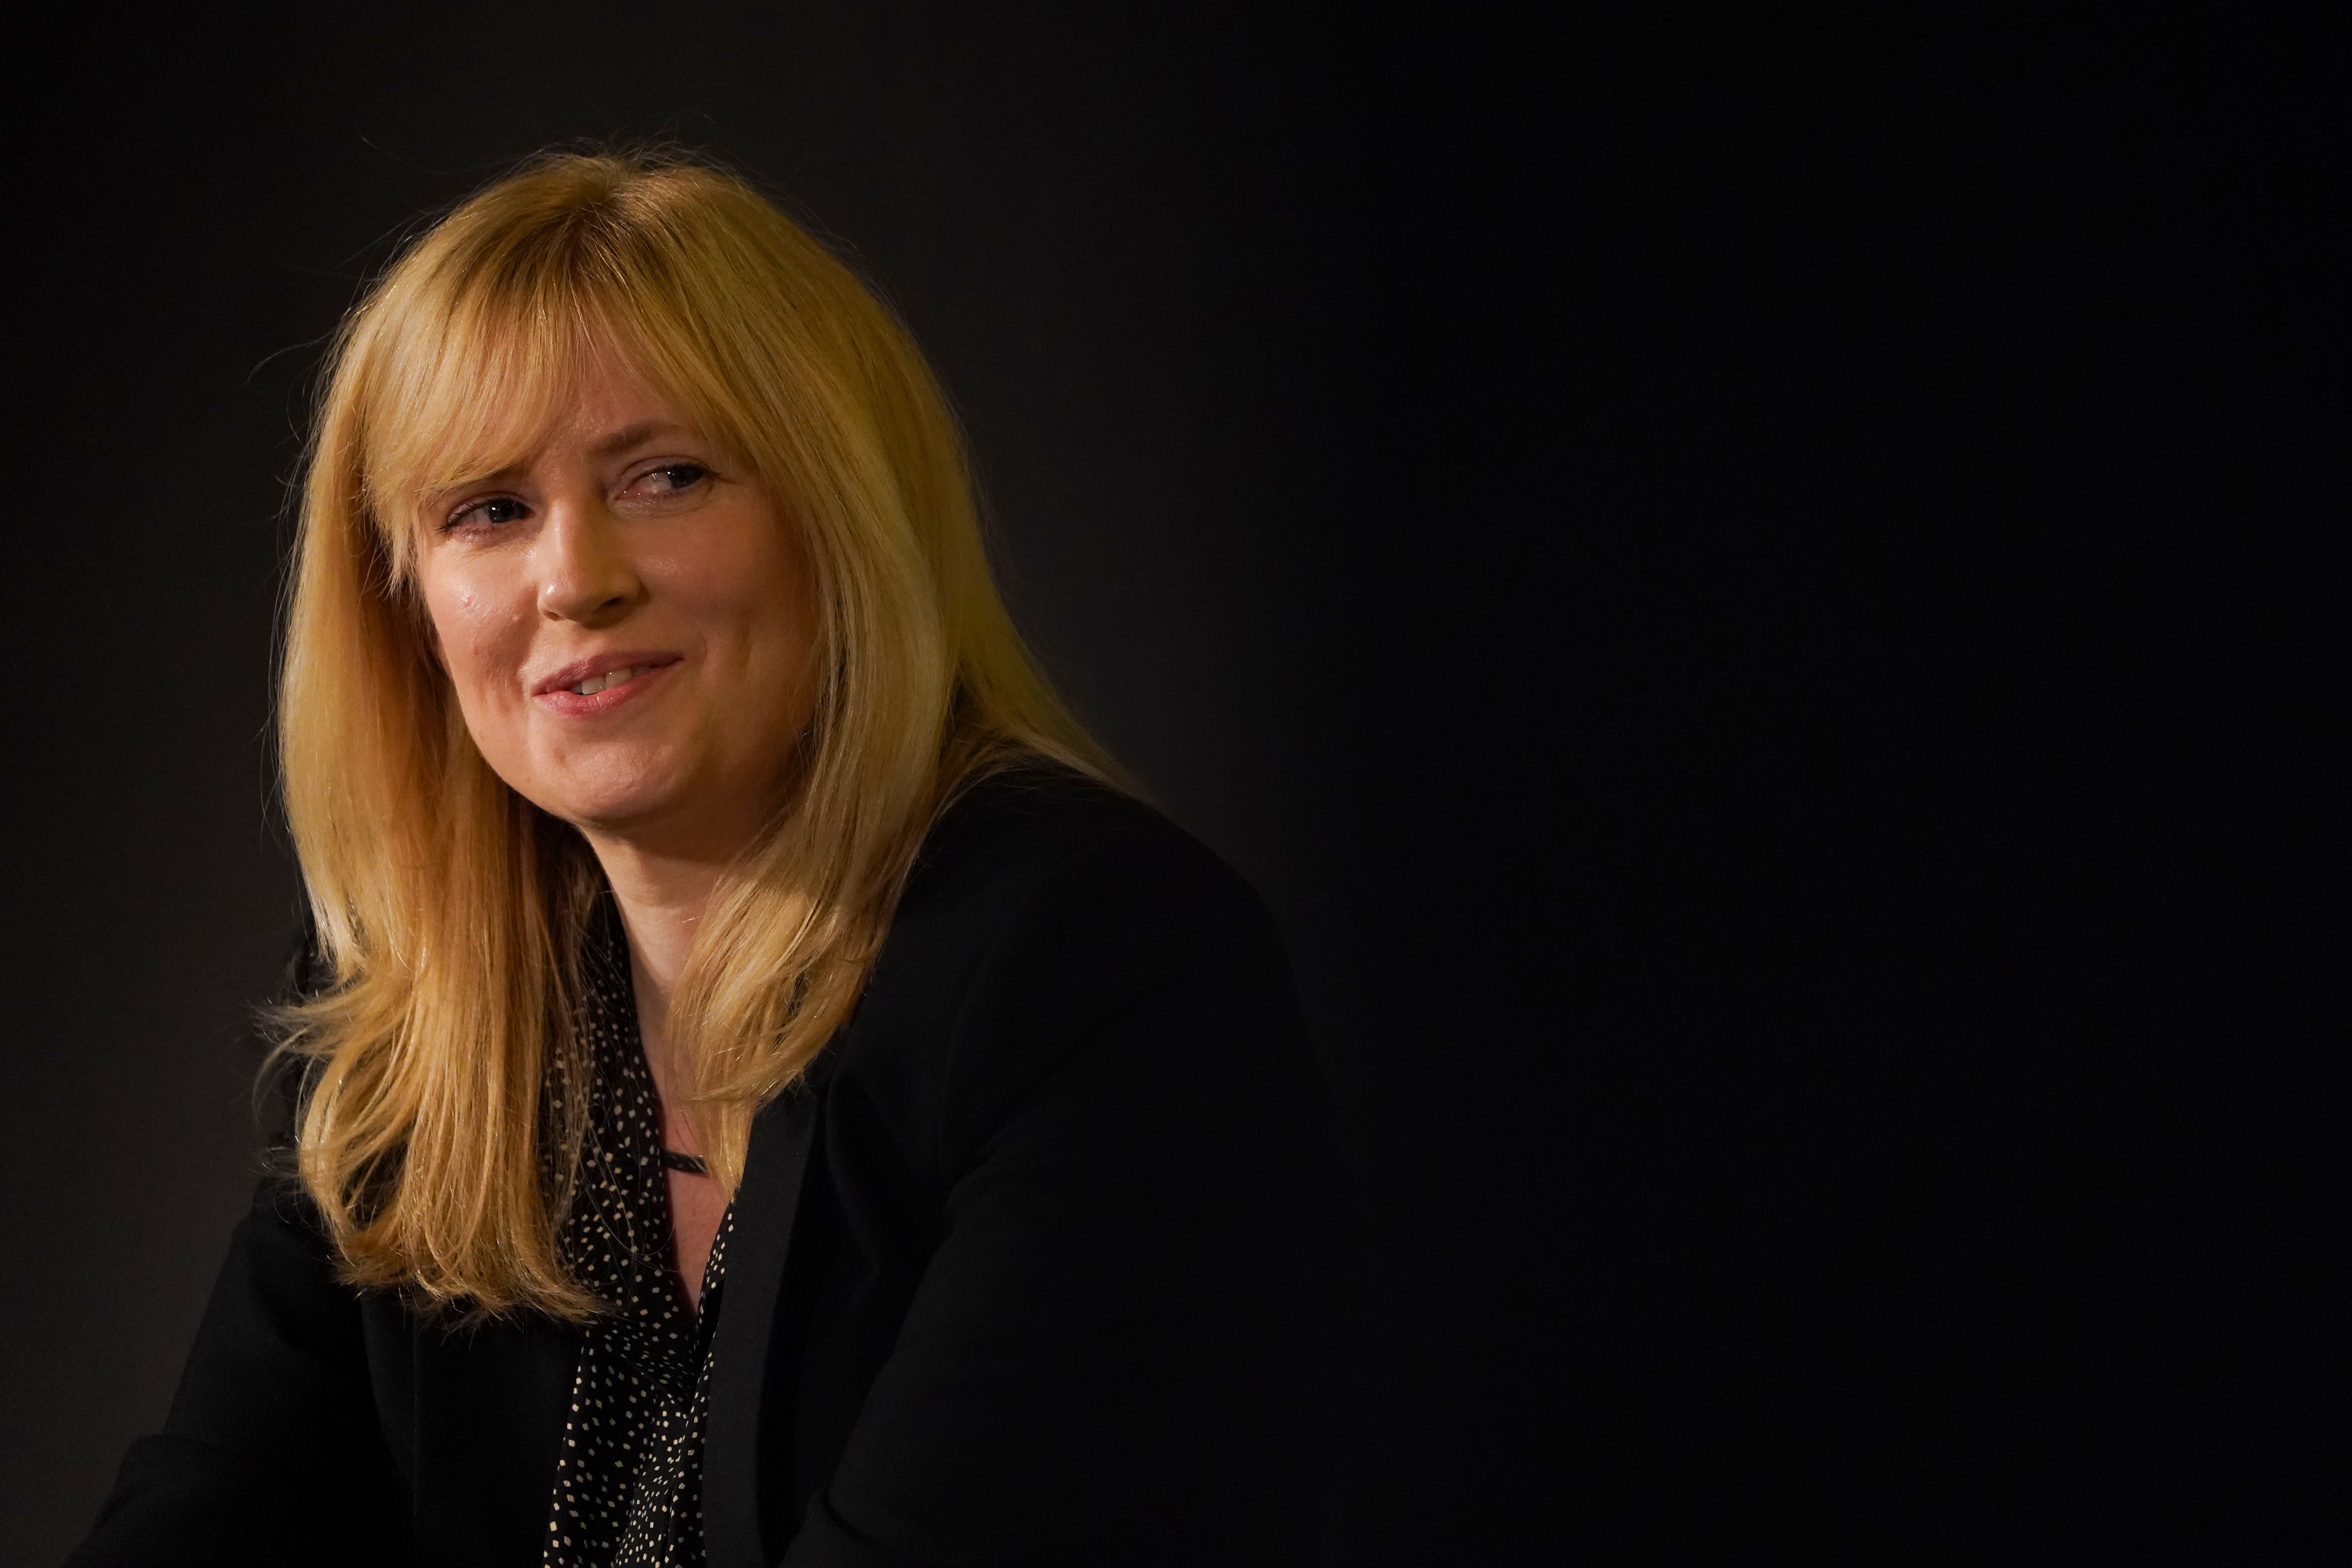 MP Rosie Duffield accused Labour male colleagues of trying to shout down her opinions on gender in the Commons (Kirsty O’Connor/PA)